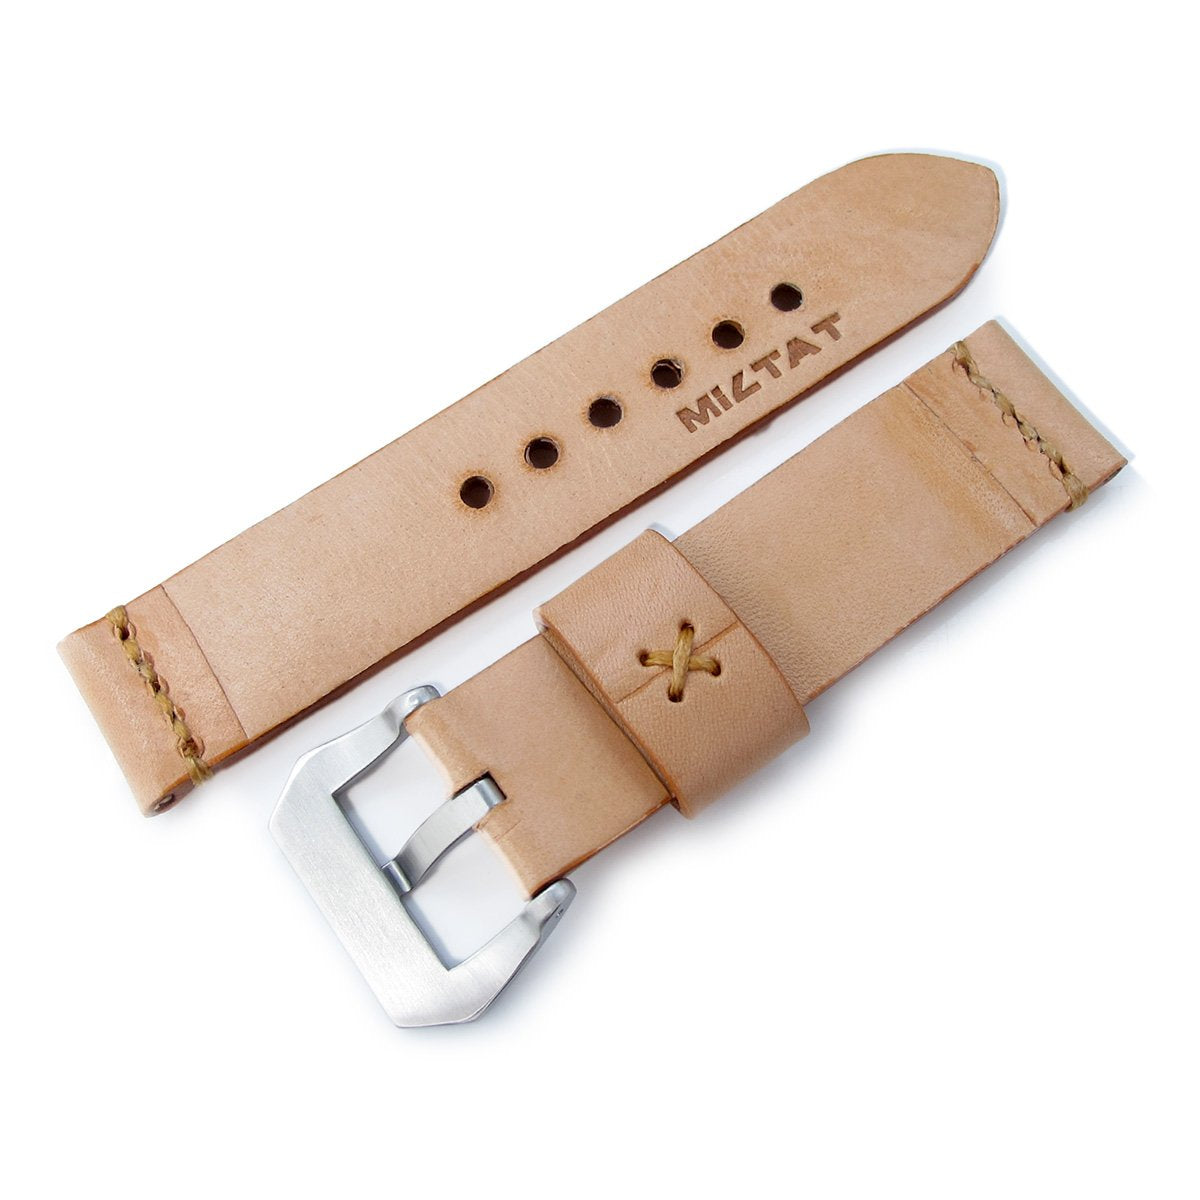 MiLTAT Zizz Collection 22mm Braided Calf Leather Watch Strap LV Beige Tan Stitches Strapcode Watch Bands